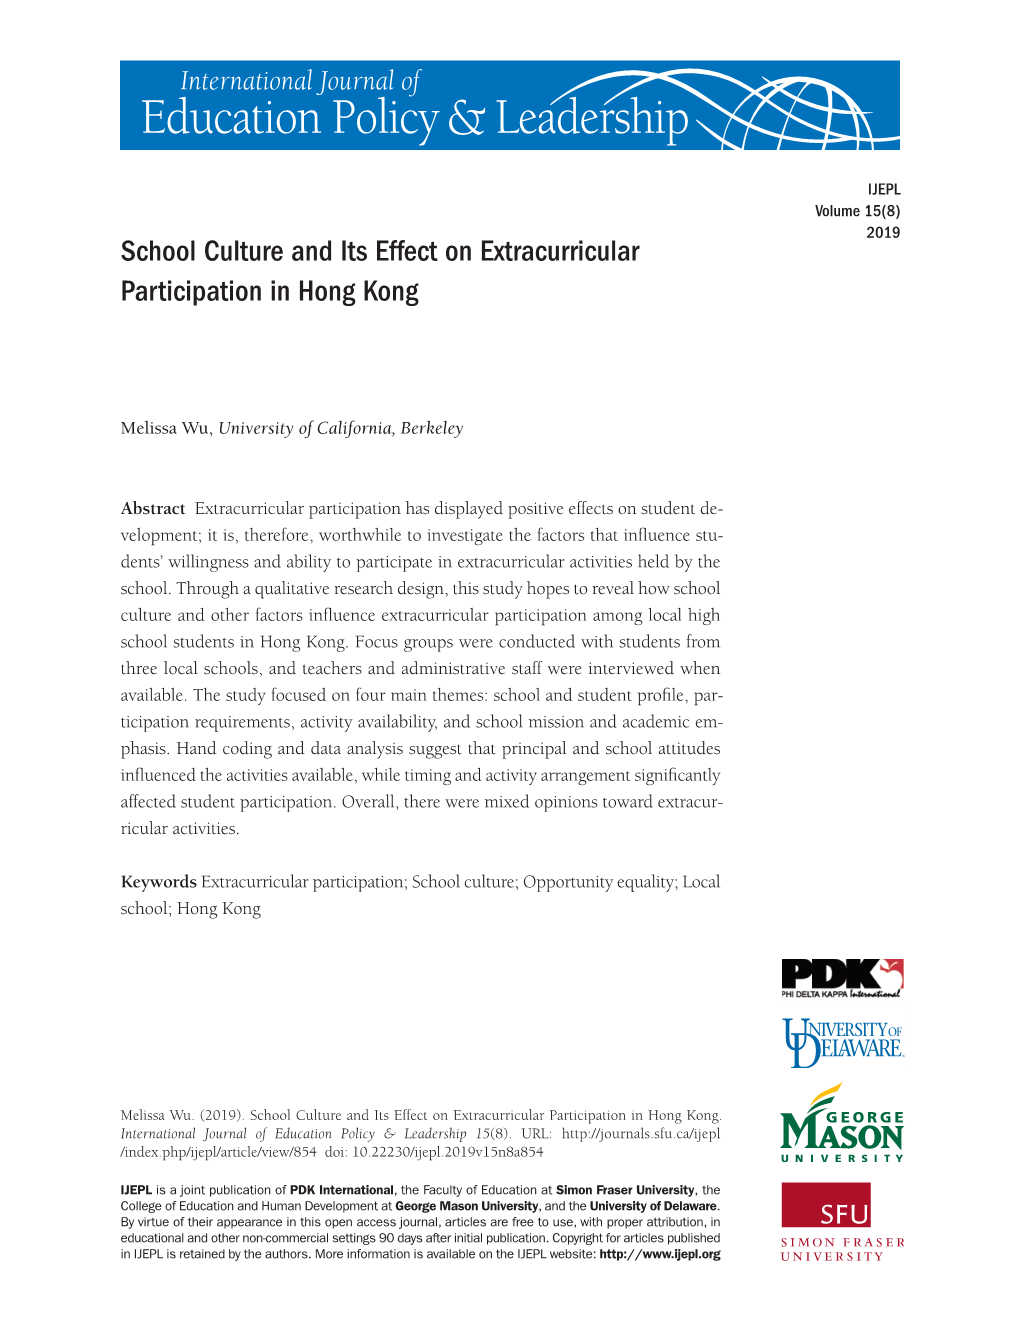 School Culture and Its Effect on Extracurricular Participation in Hong Kong